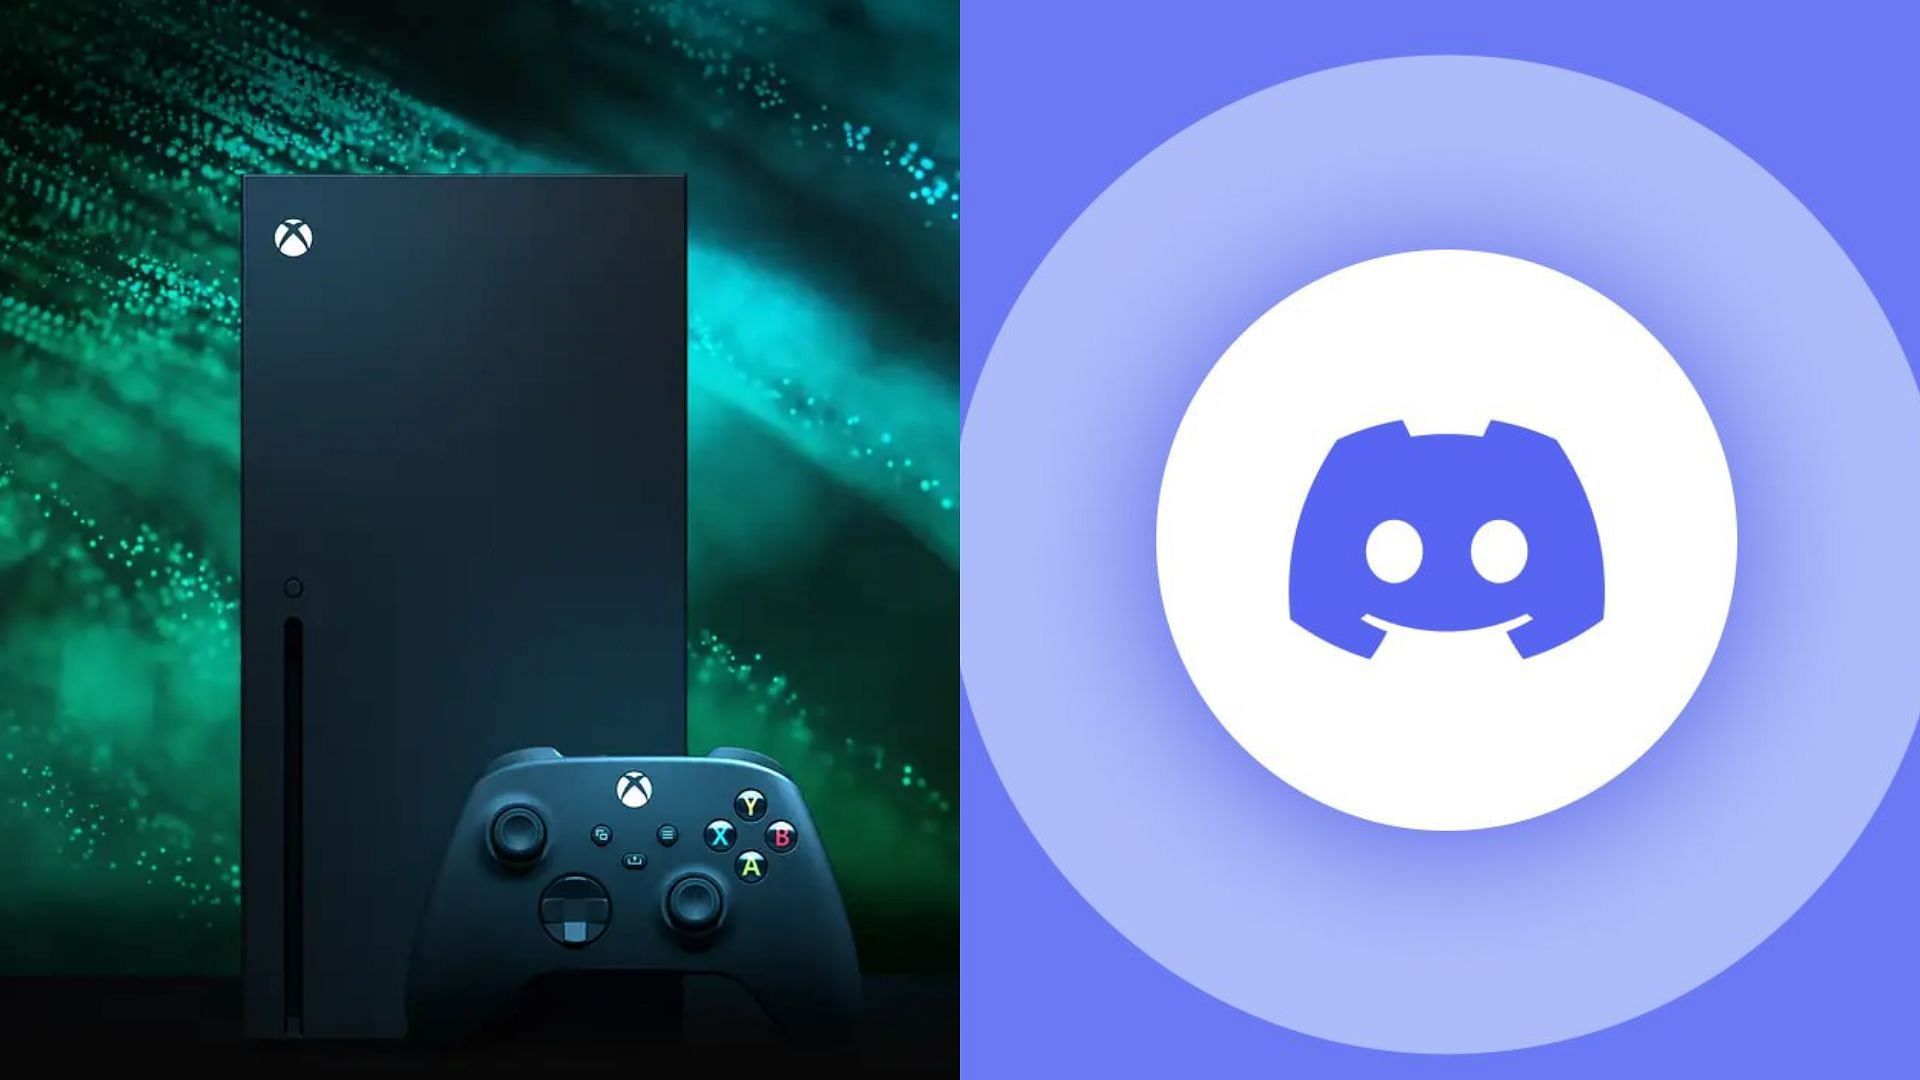 Xbox gamers can now stream their gameplay via Discord (Image via Microsoft and Discord)